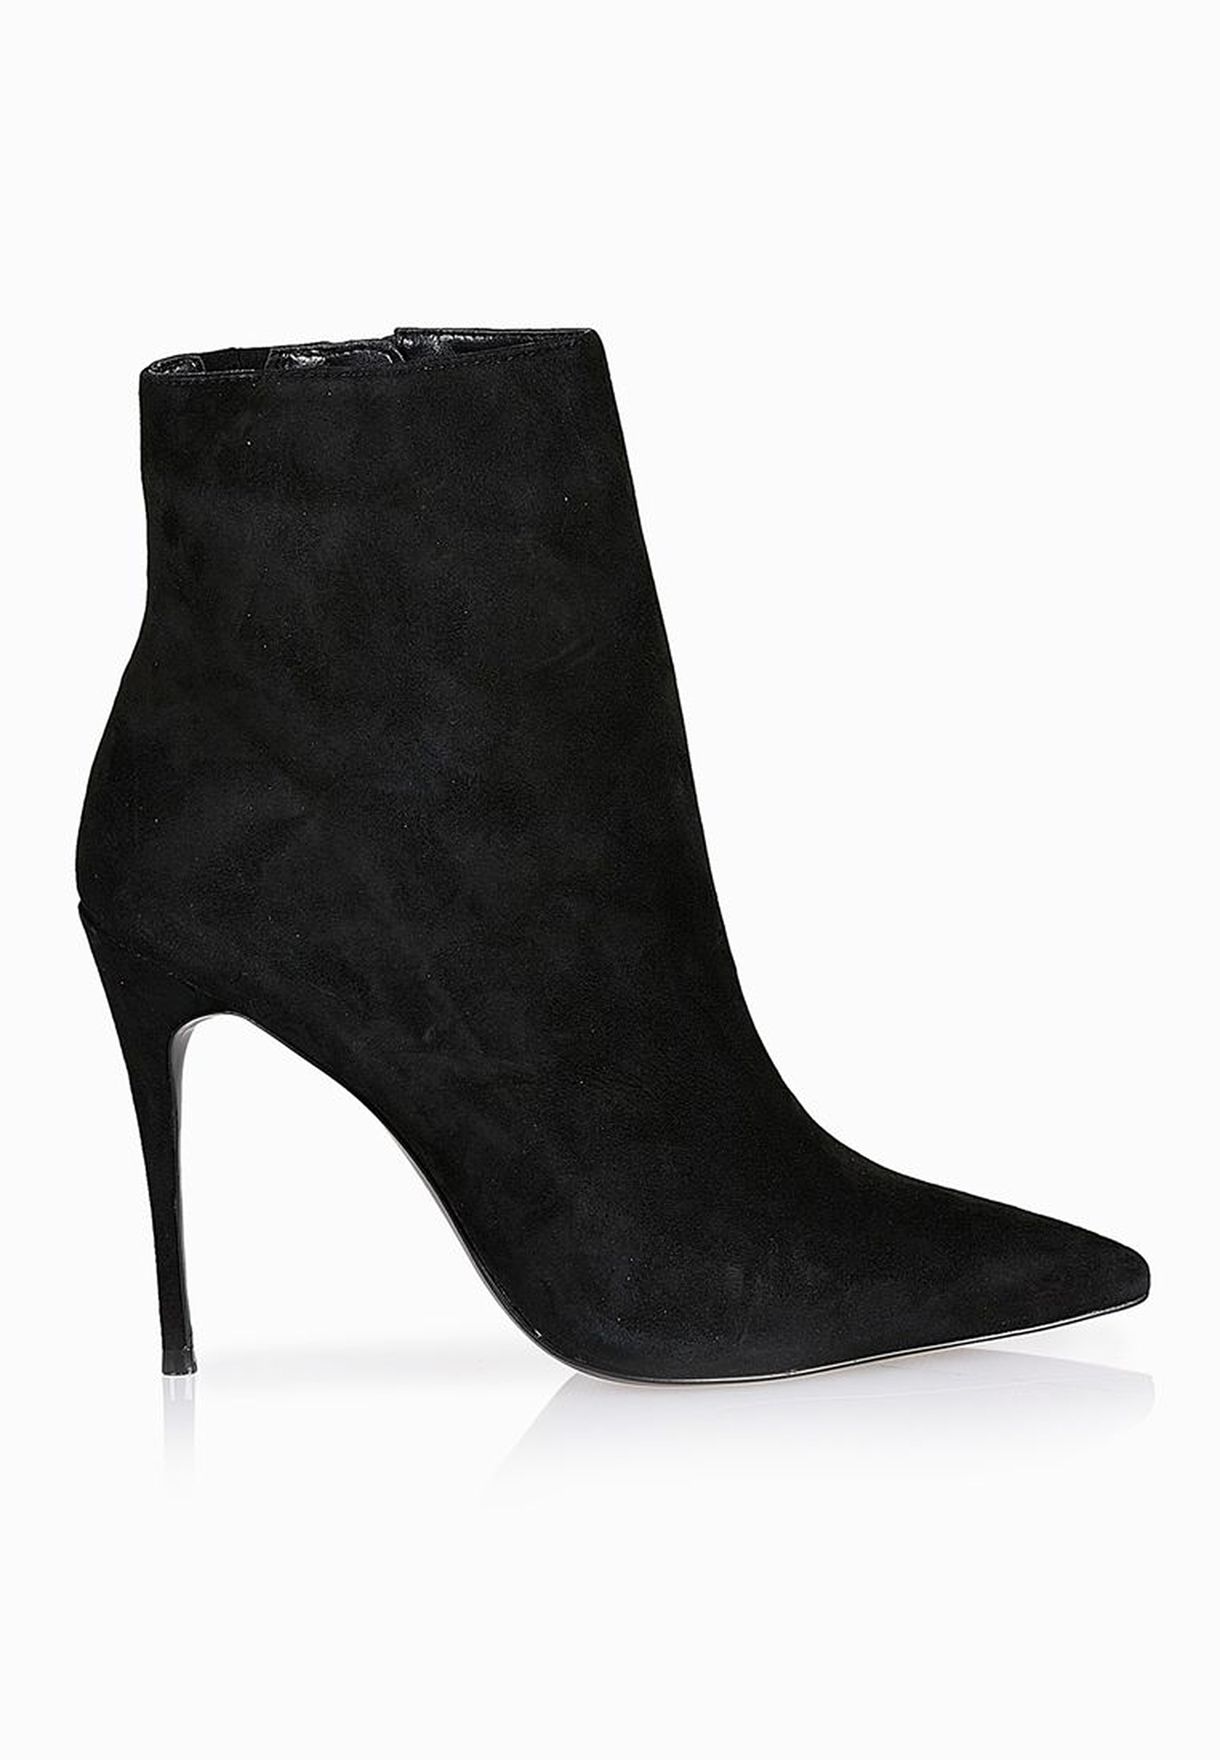 aldo pointed toe boots